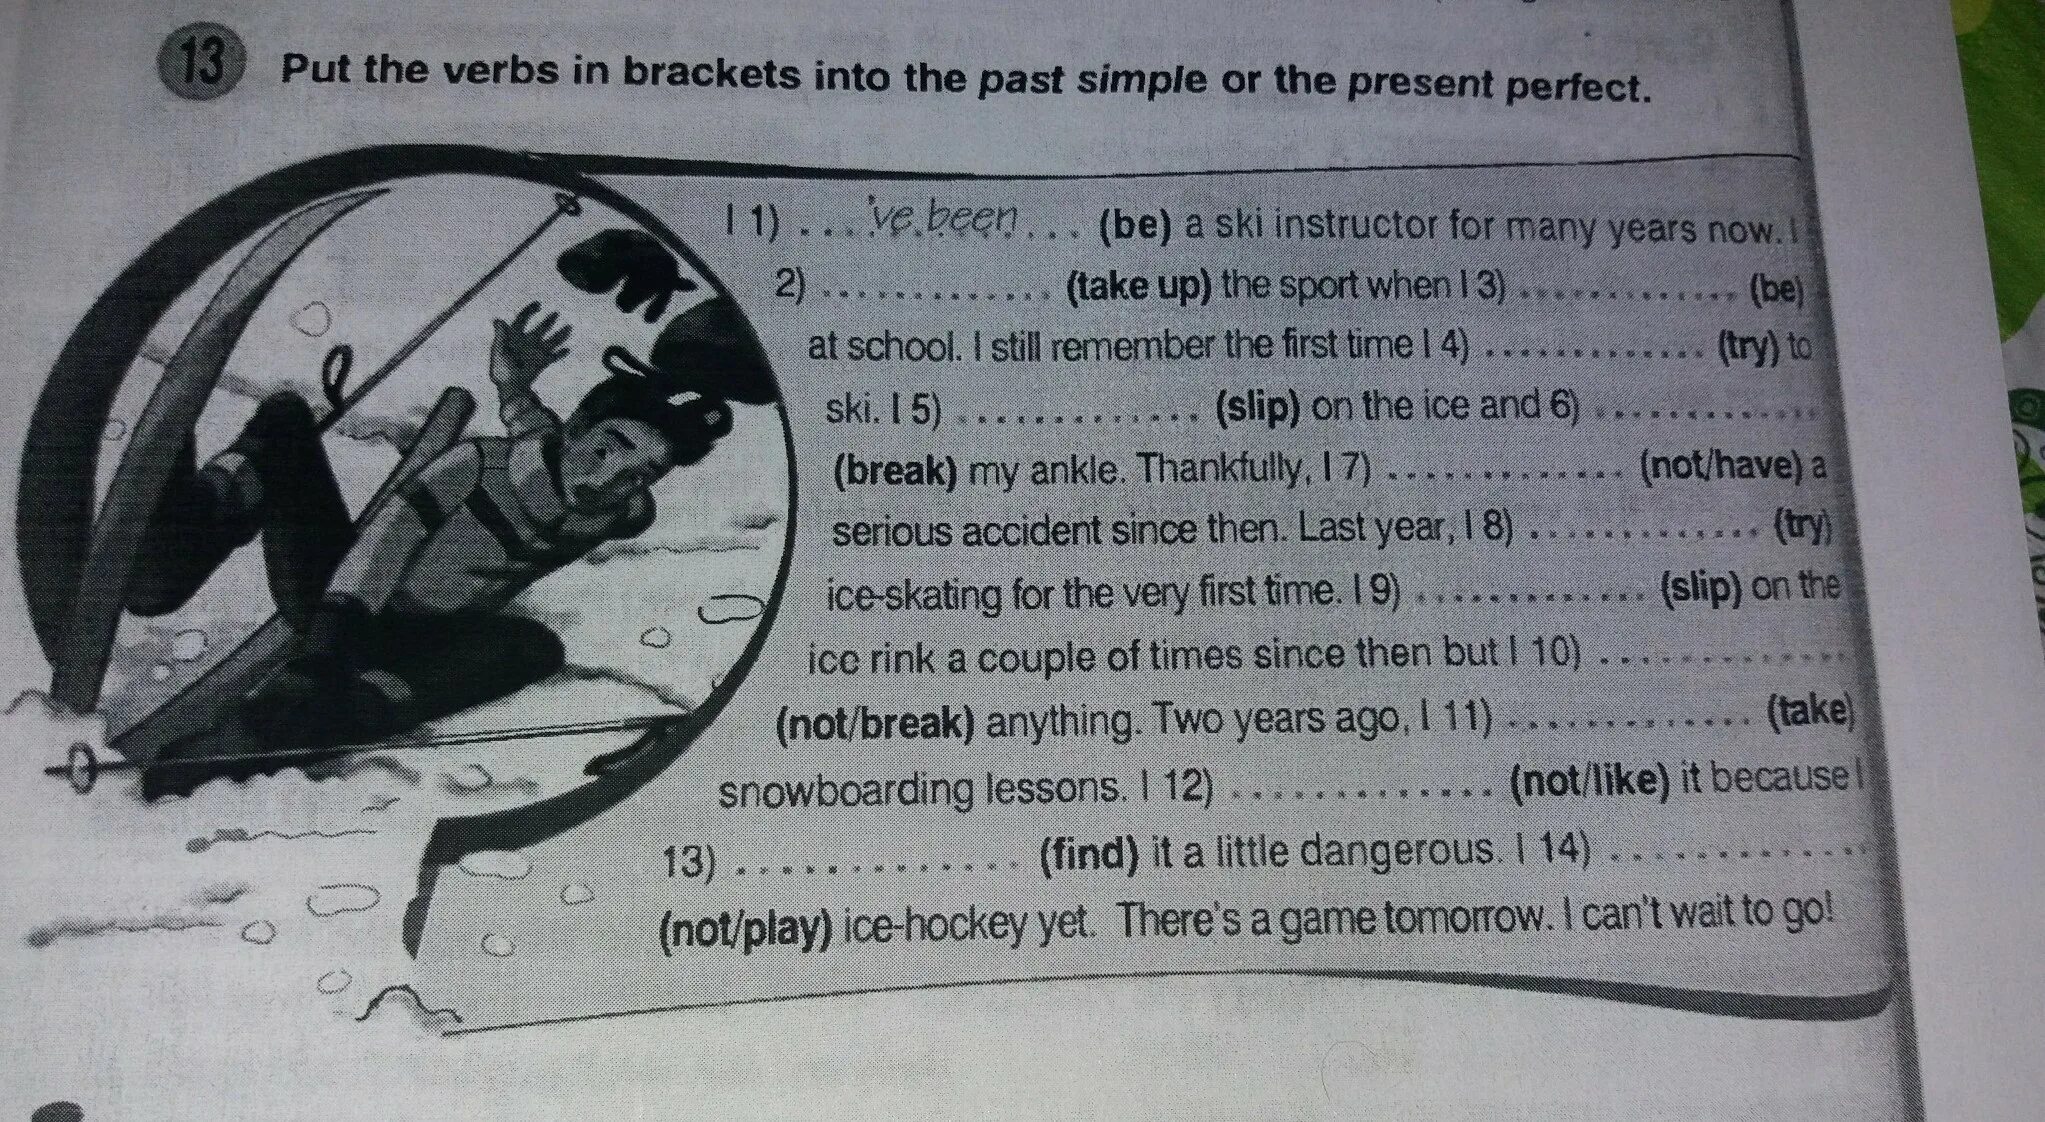 Put the verbs in Brackets into the past simple. Put the verbs in Brackets into the past simple or the present perfect. Put the verbs in Brackets into the past simple or the present perfect simple. Put the verbs into past into past simple. My find broken